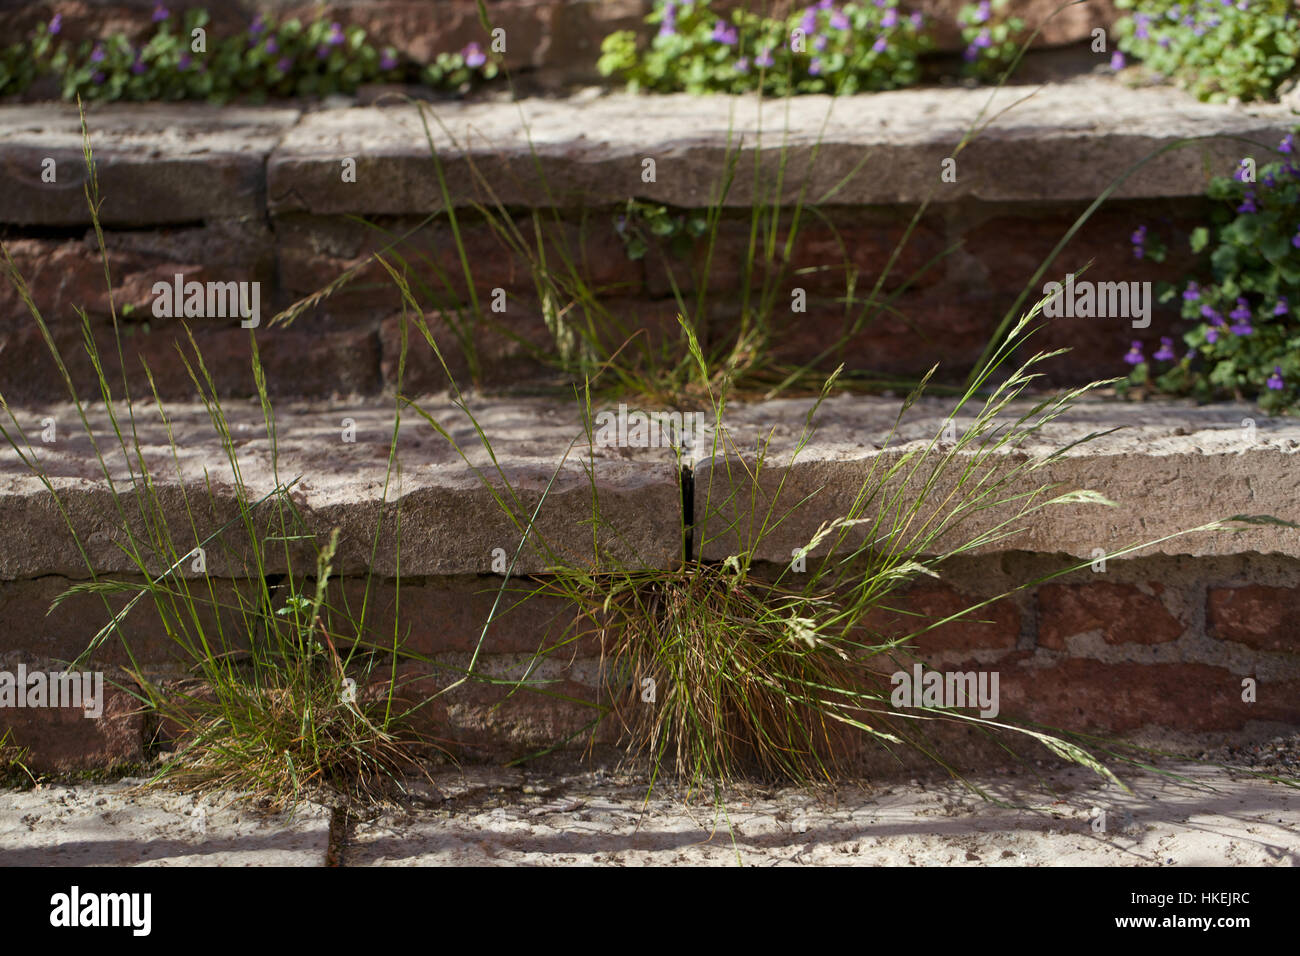 grass on steps. growth, natural, brick, staircase. Stock Photo